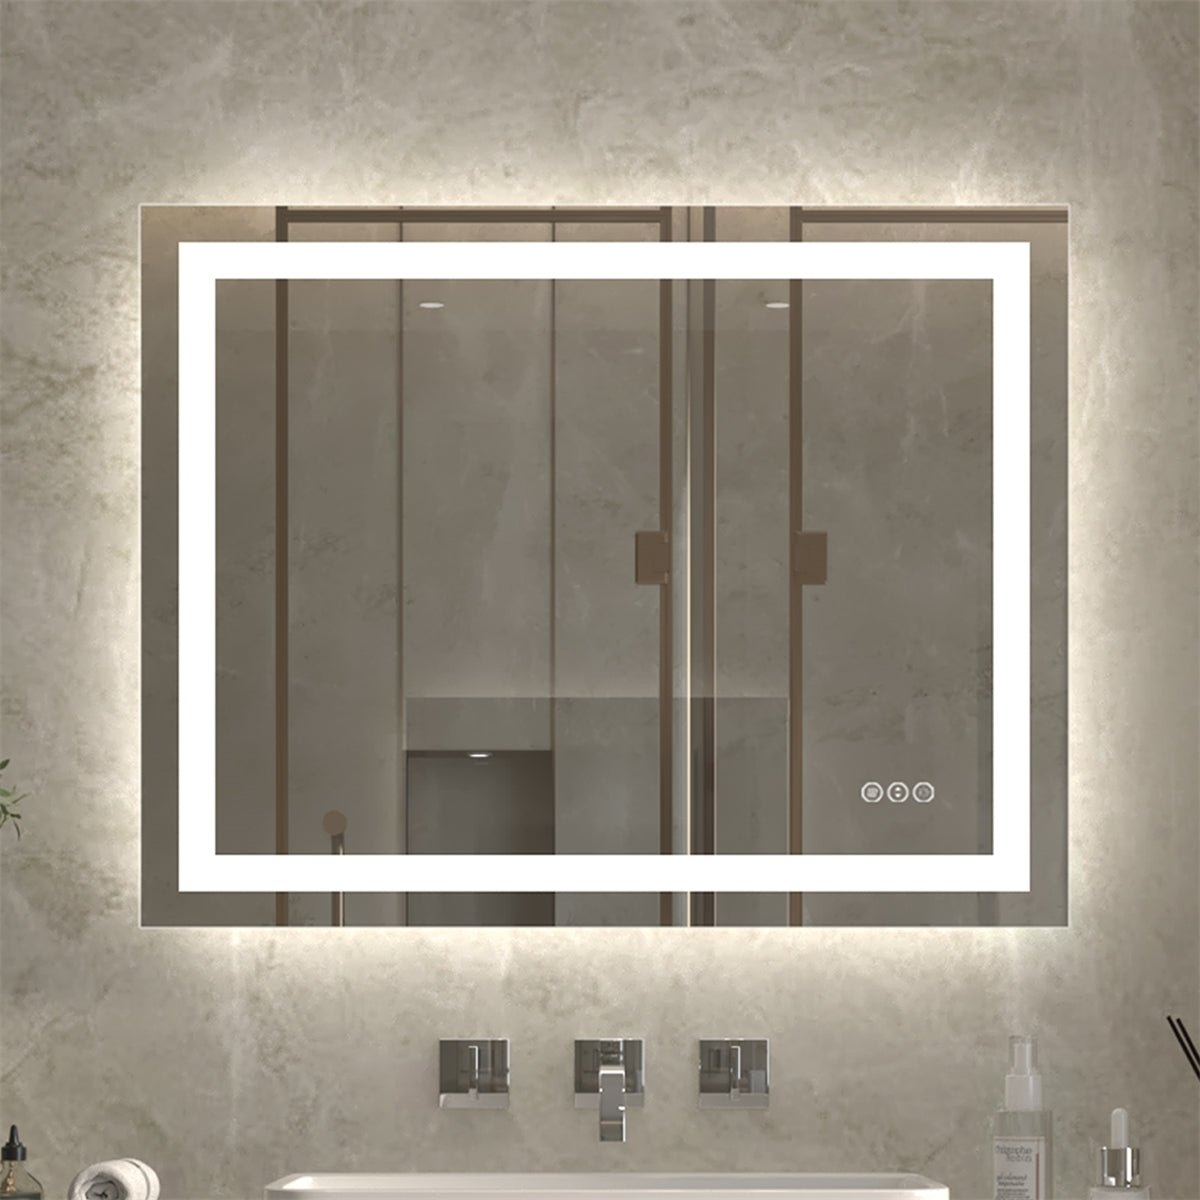 ExBrite 36" W X 28" H LED Bathroom Large Light Led Mirror,Anti Fog,Dimmable,Dual Lighting Mode,Tempered Glass